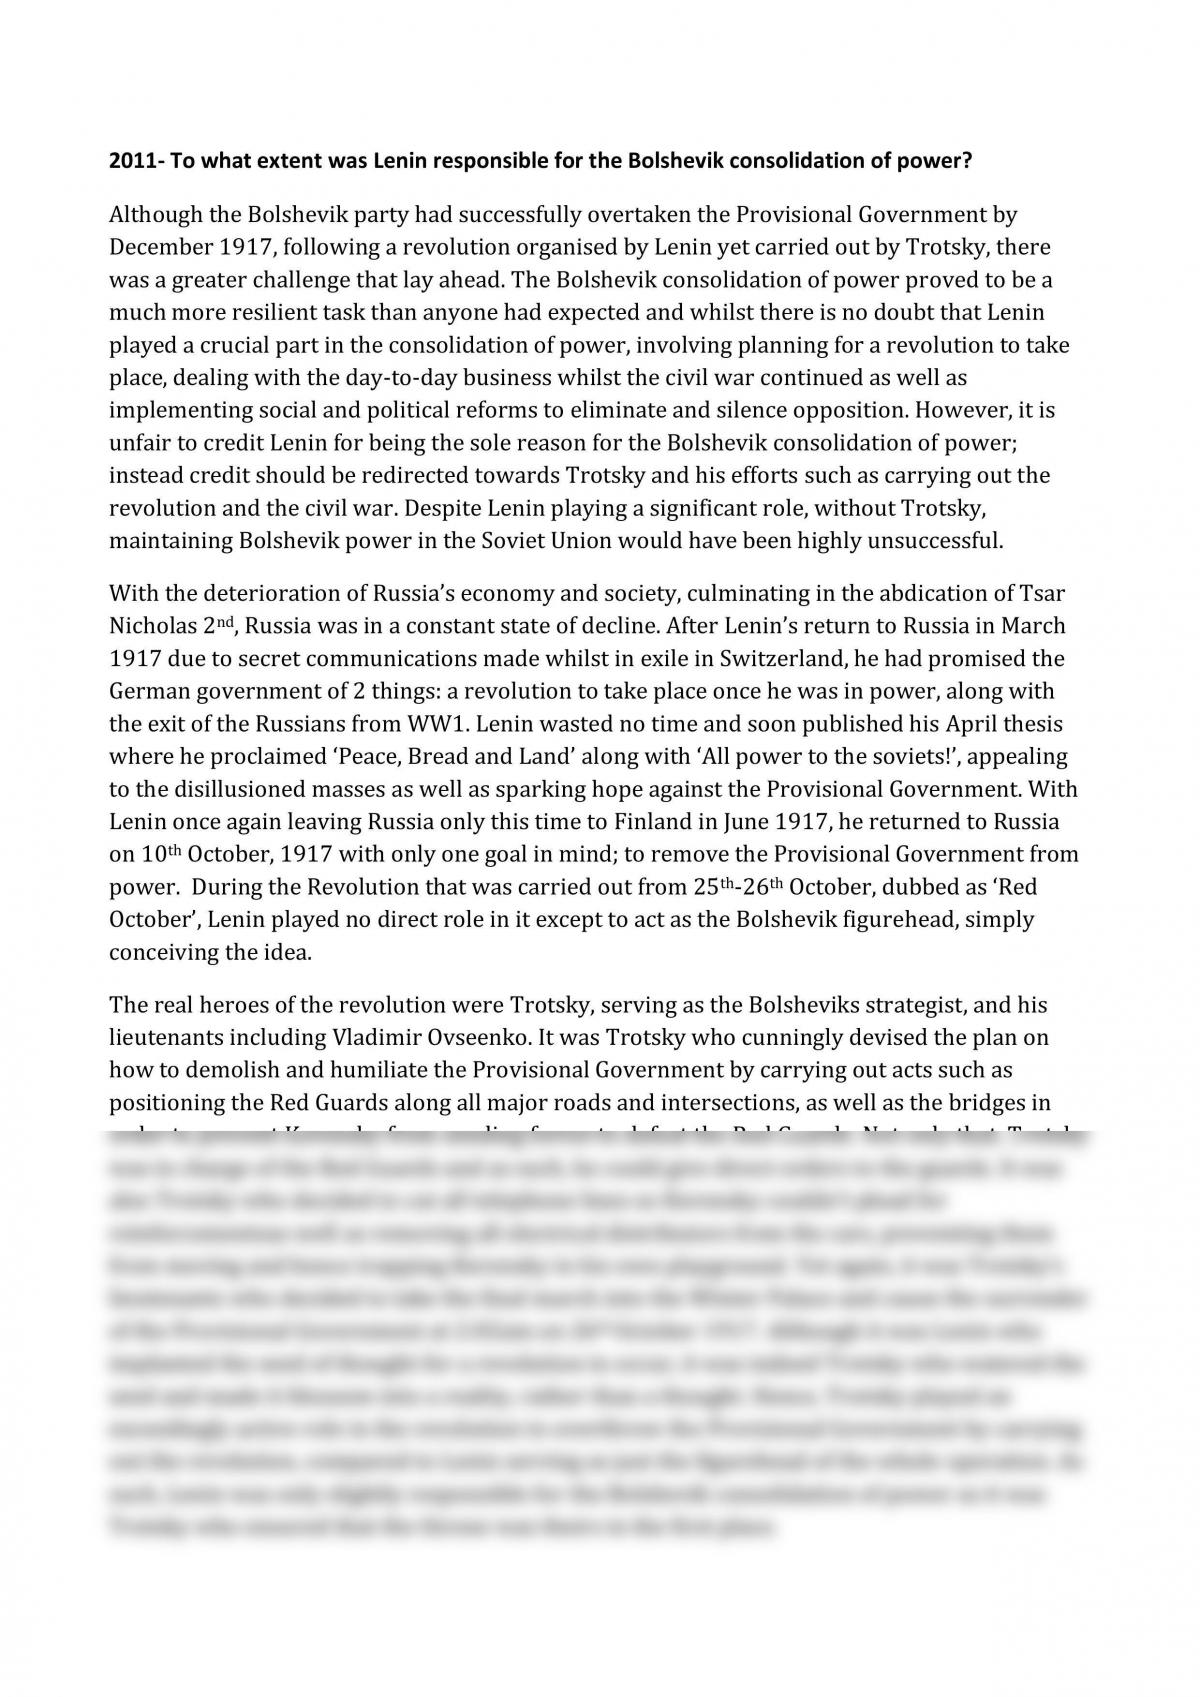 HSC Modern History Module 2 Russia Essay - Page 1